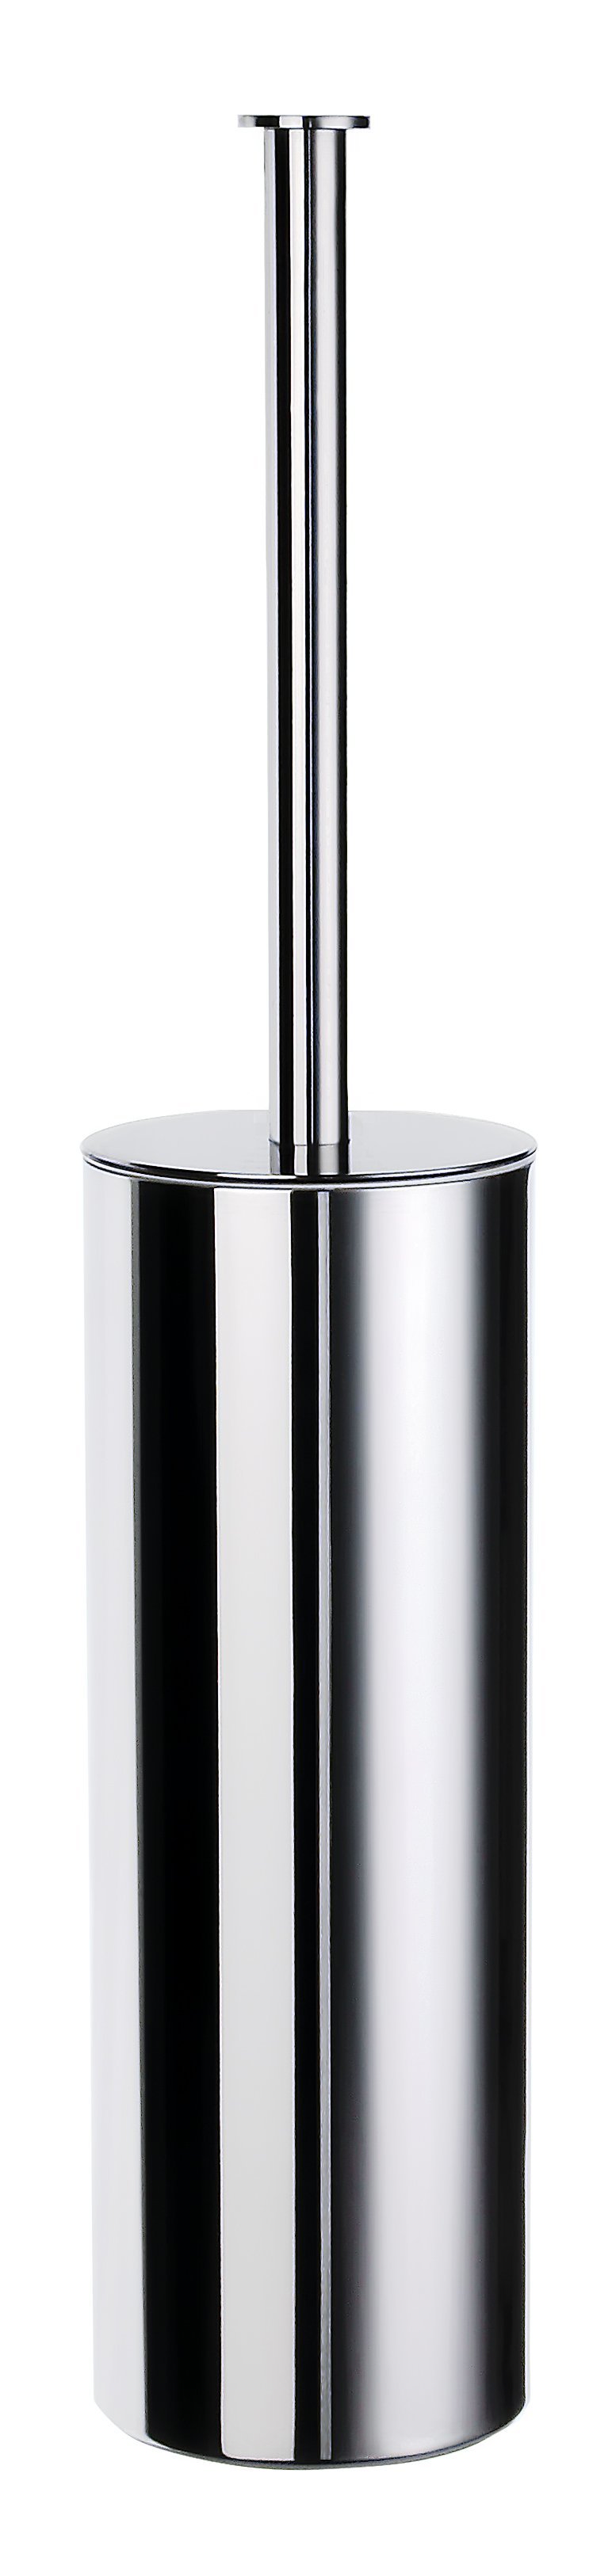 Smedbo Lite Toilet Brush with Cylinder Base in Stainless Steel Polished